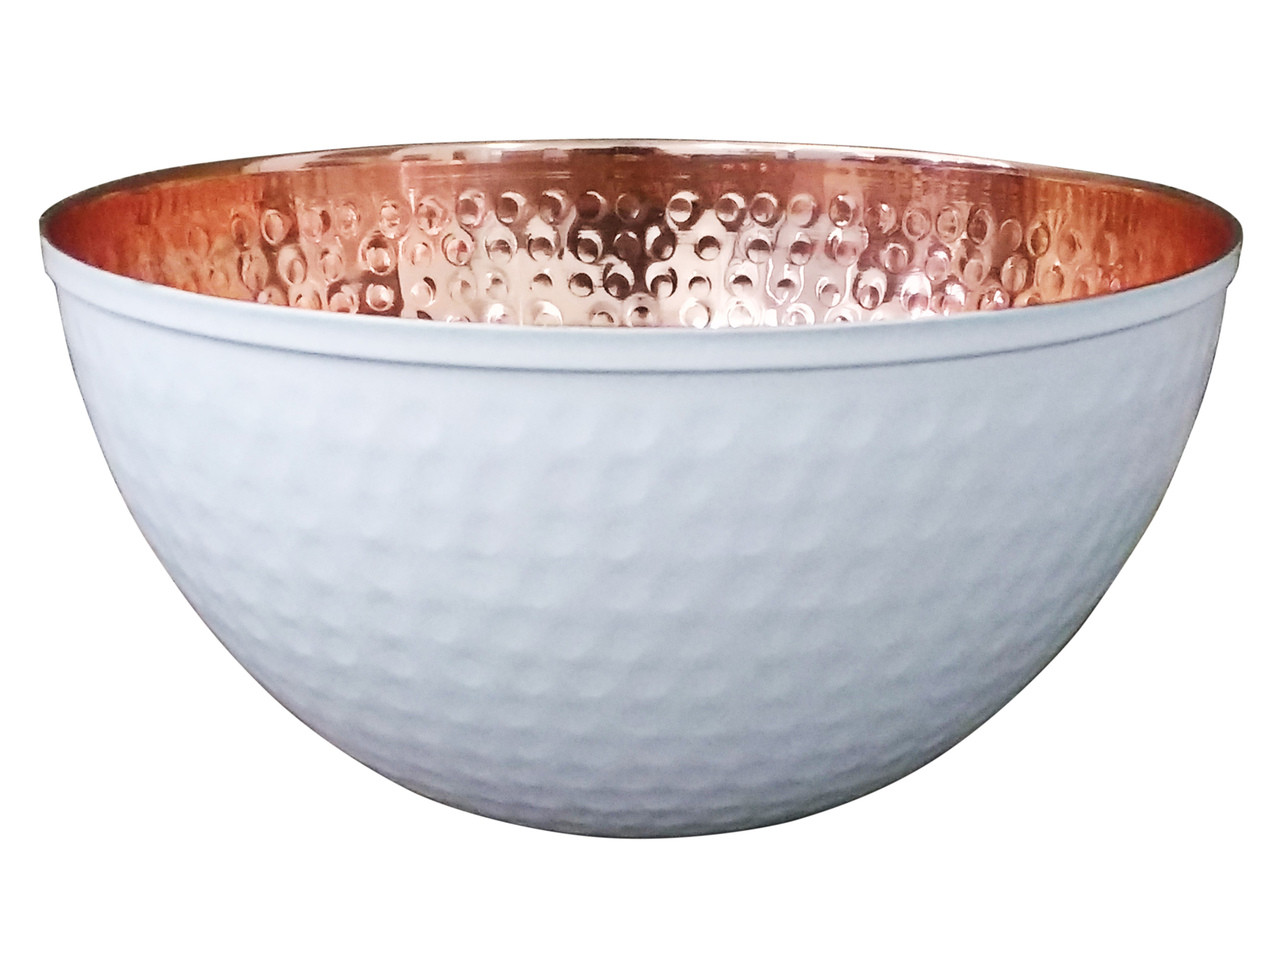 Copper and White Mixing Bowl - Alchemade